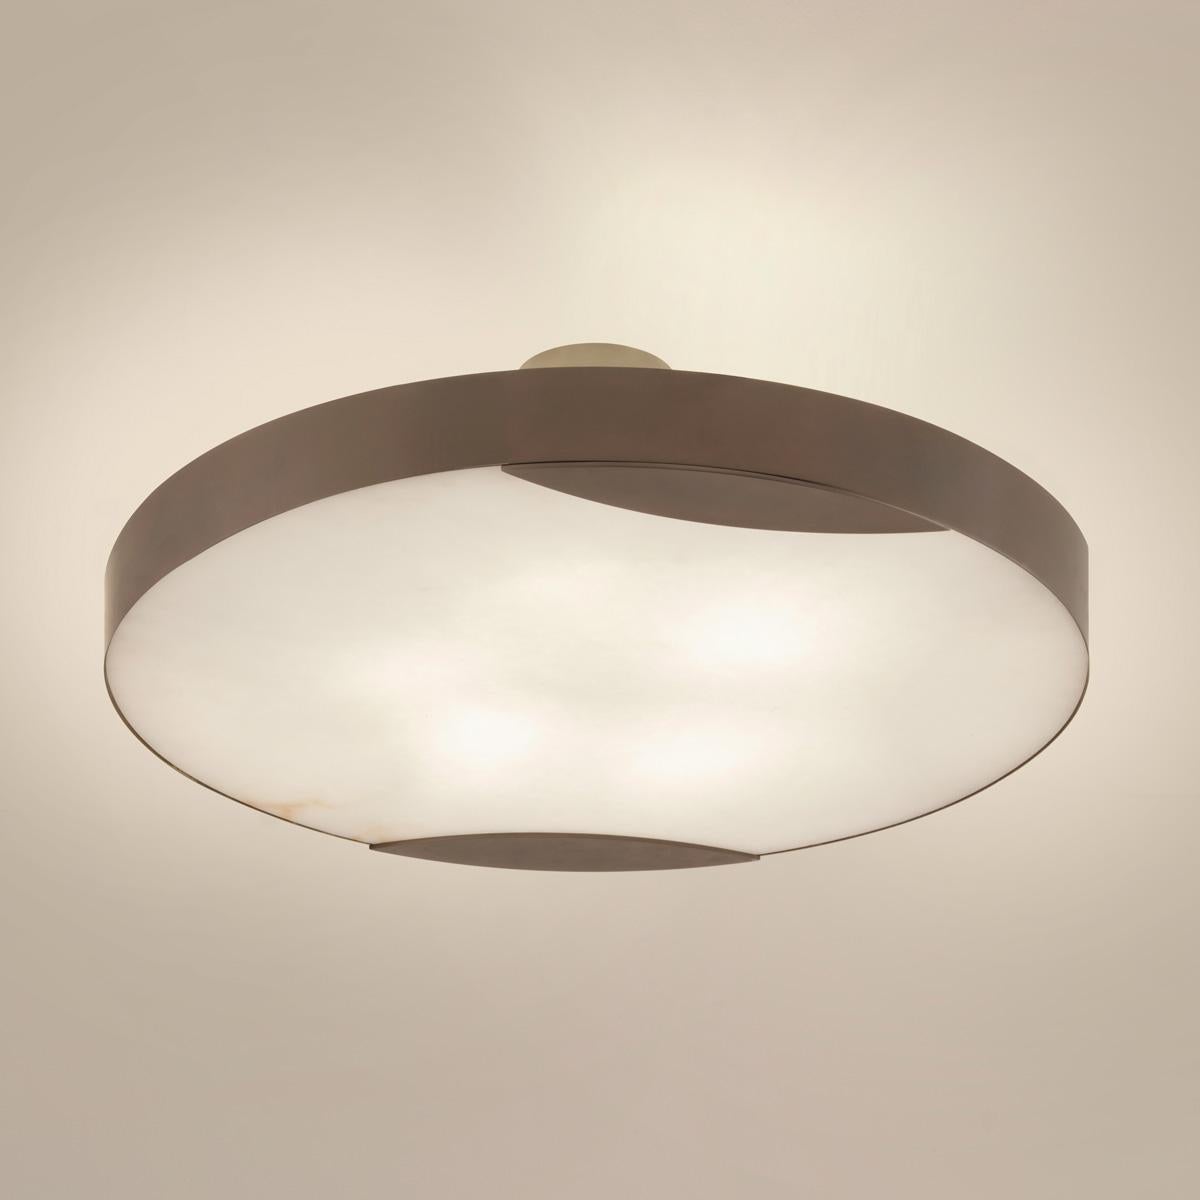 Cloud N.1 Ceiling Light by Gaspare Asaro-Satin Brass Finish For Sale 2